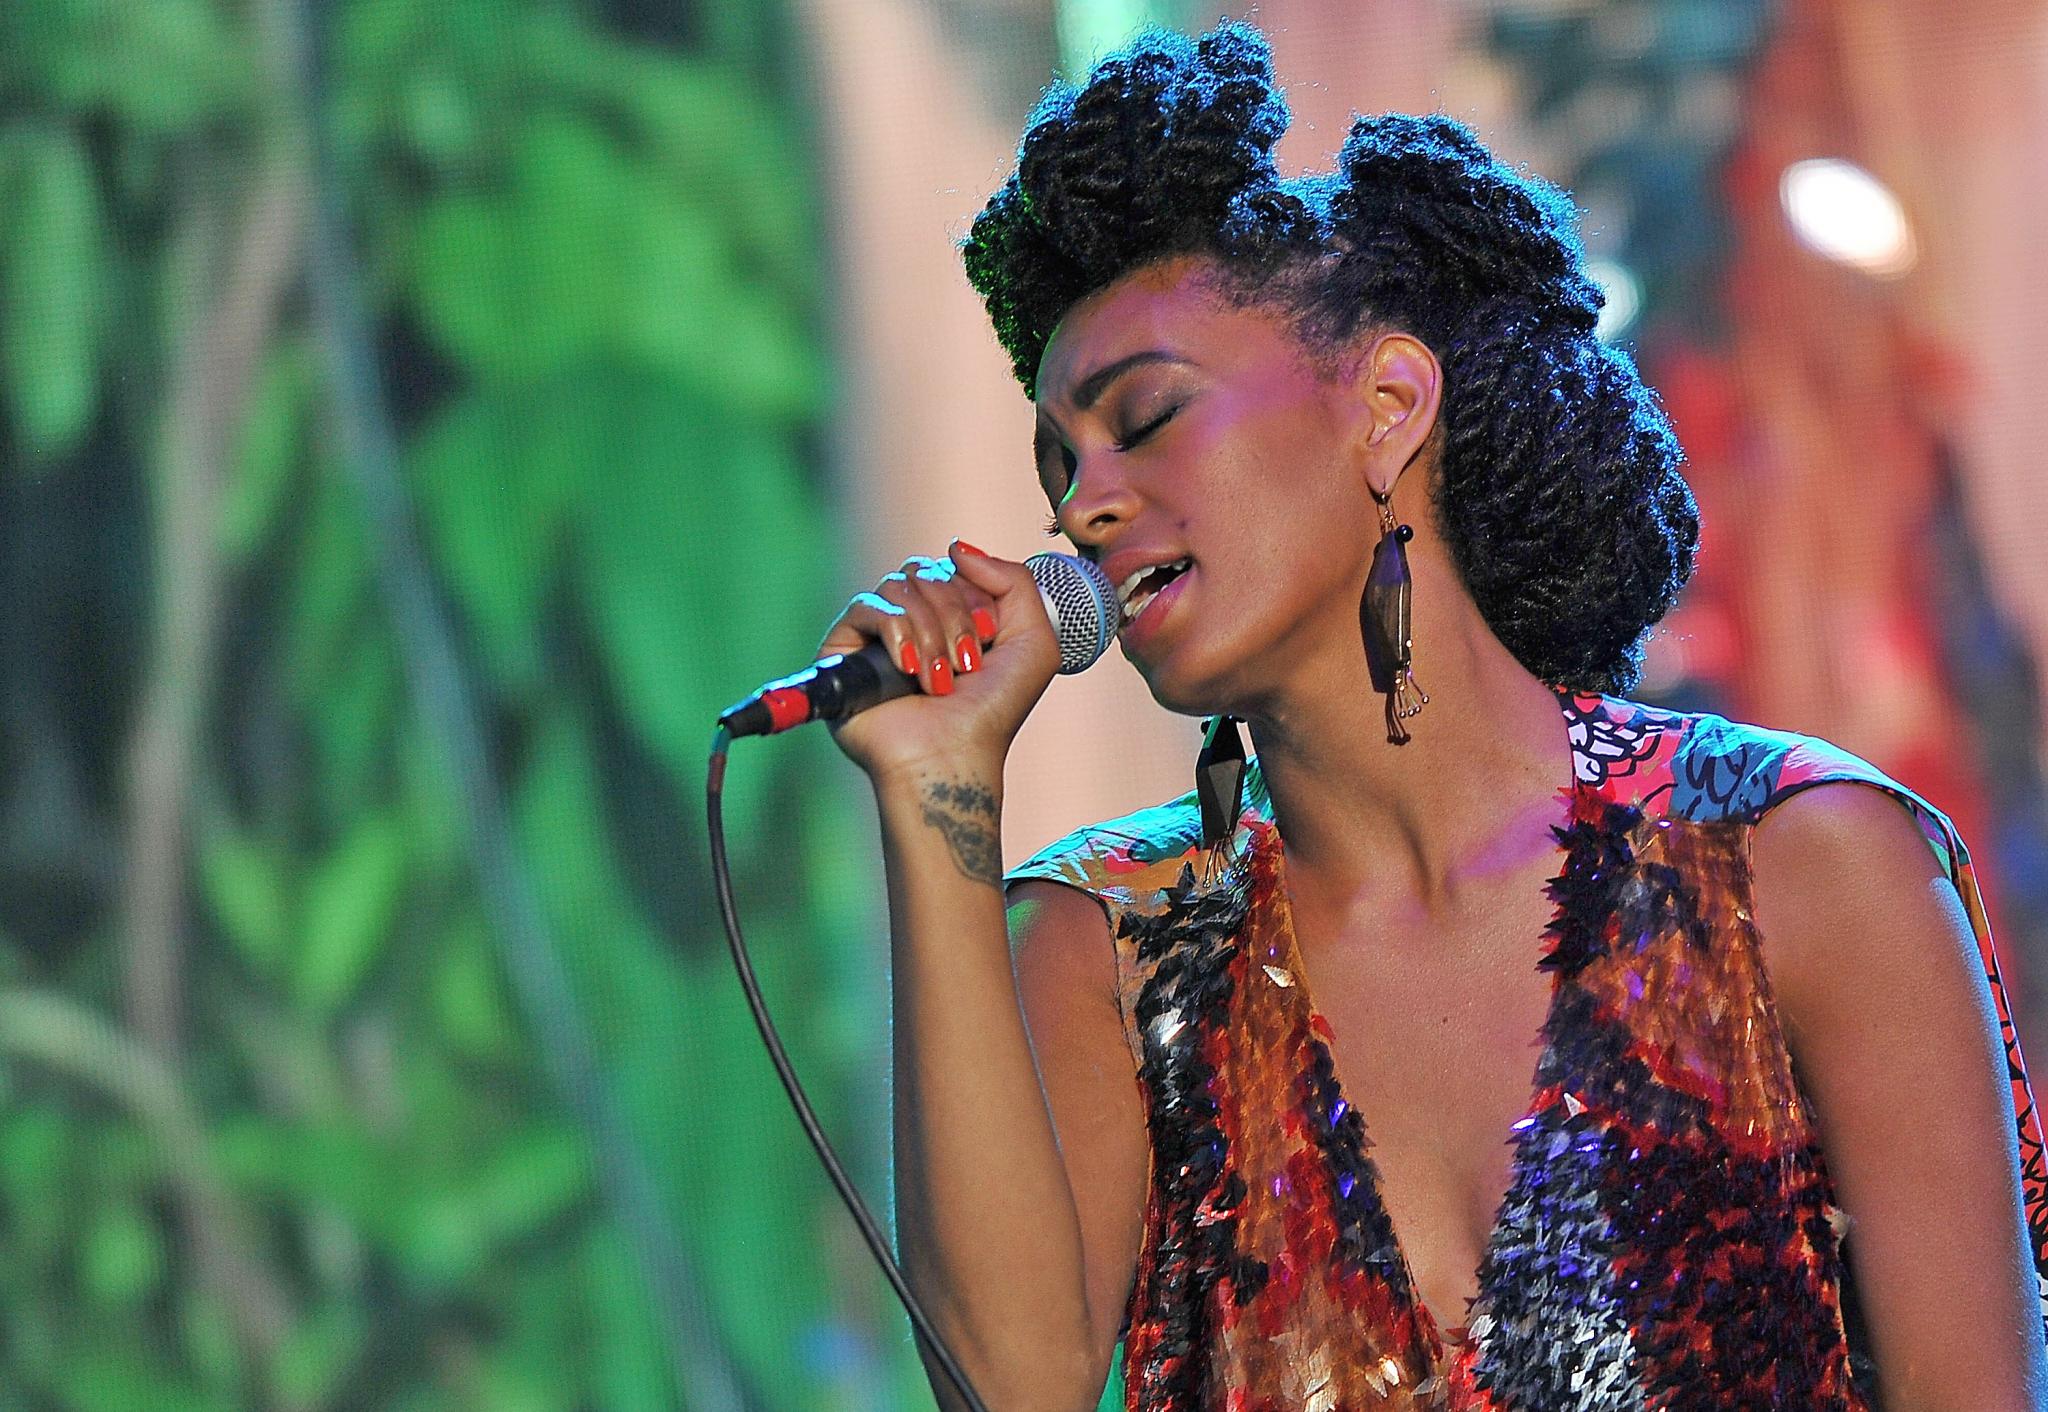 Solange's Top 10 Hair Moments of 2013
